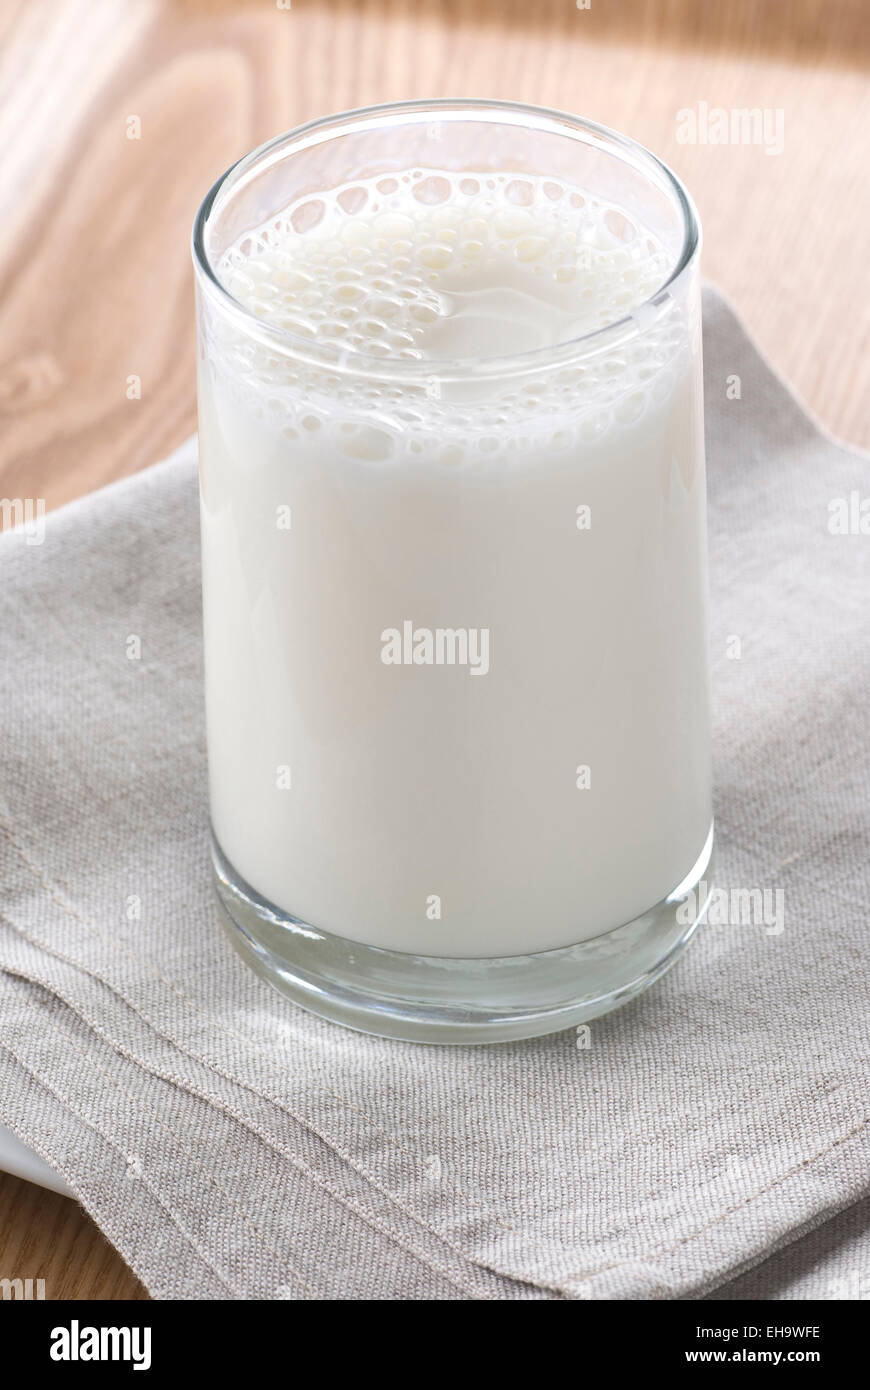 A glass of milk on a table linen napkin, plate and a tray. Stock Photo